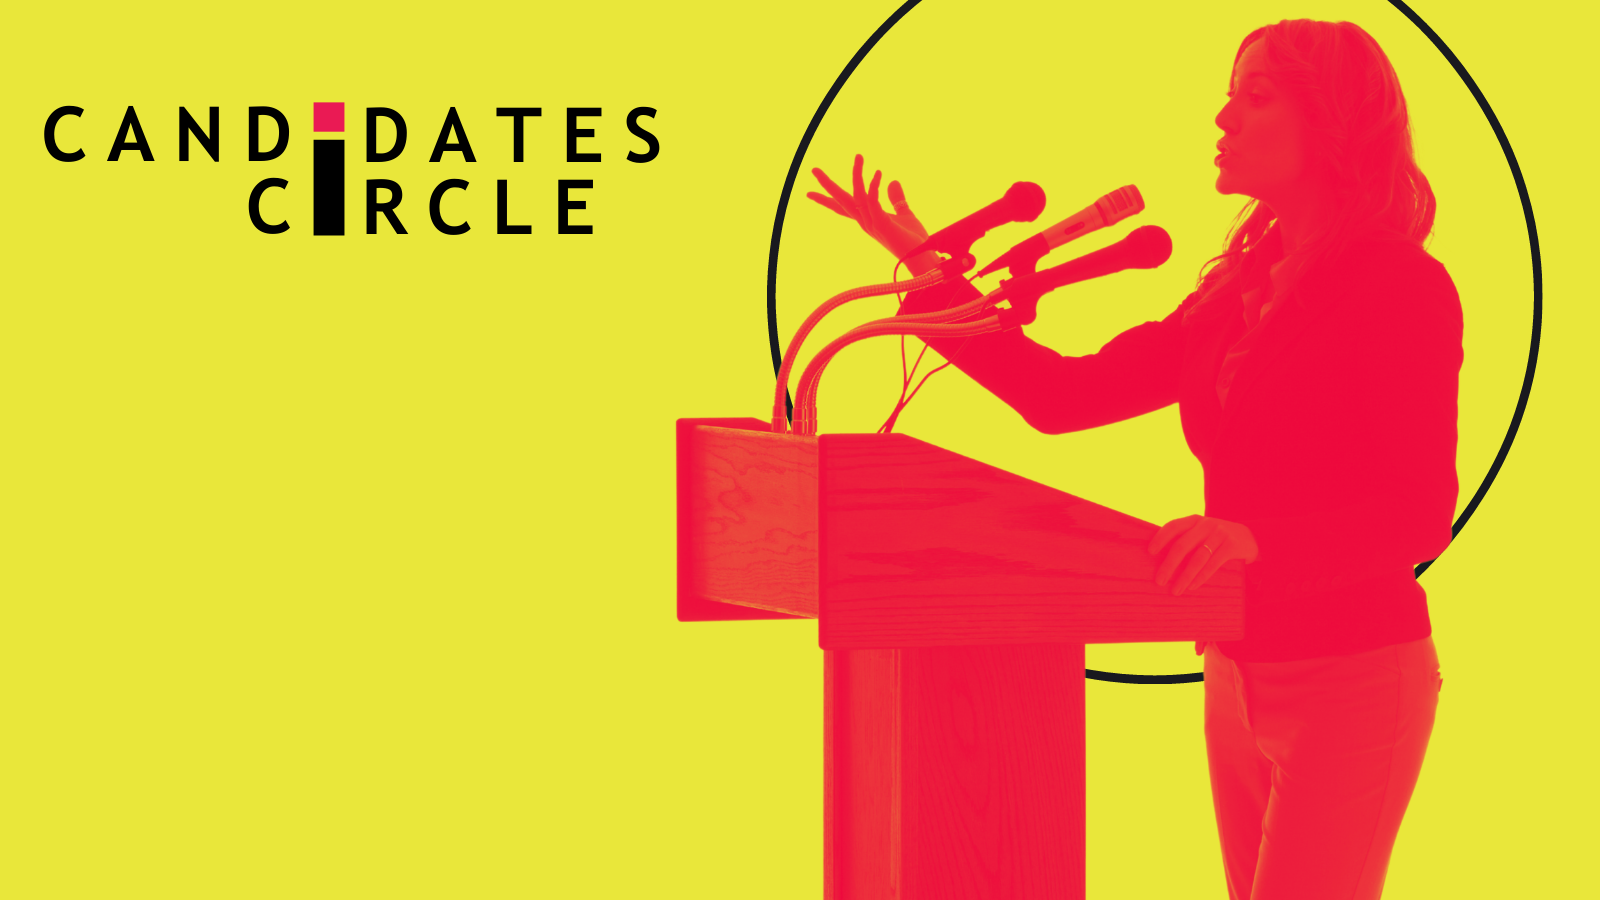 Are you running for office in 2021? Join the Candidates Circle.